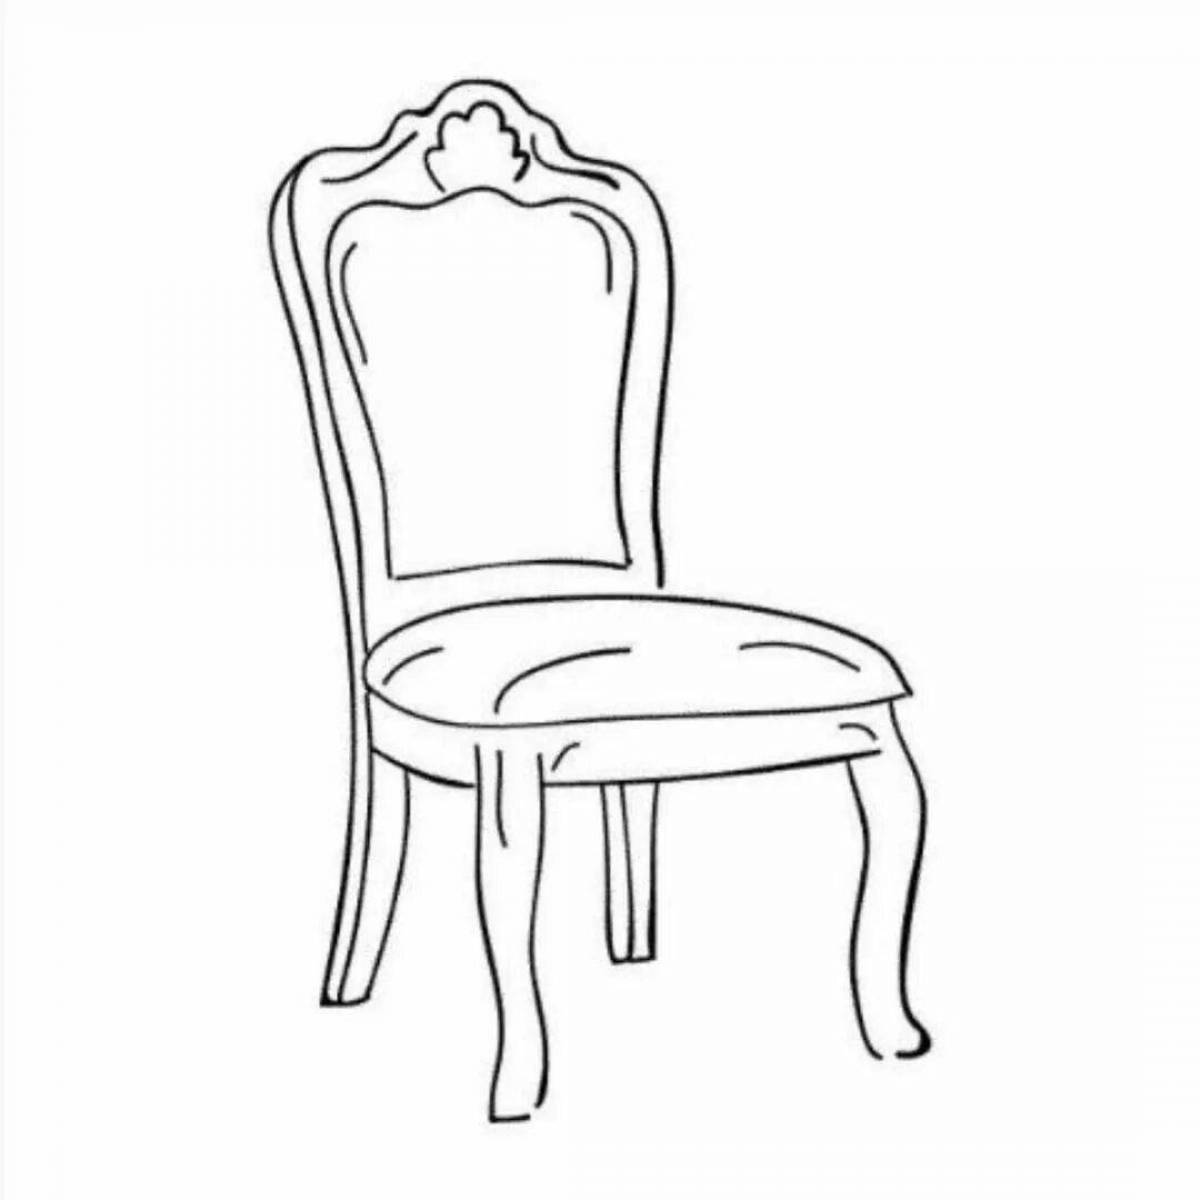 Coloring book shining high chair